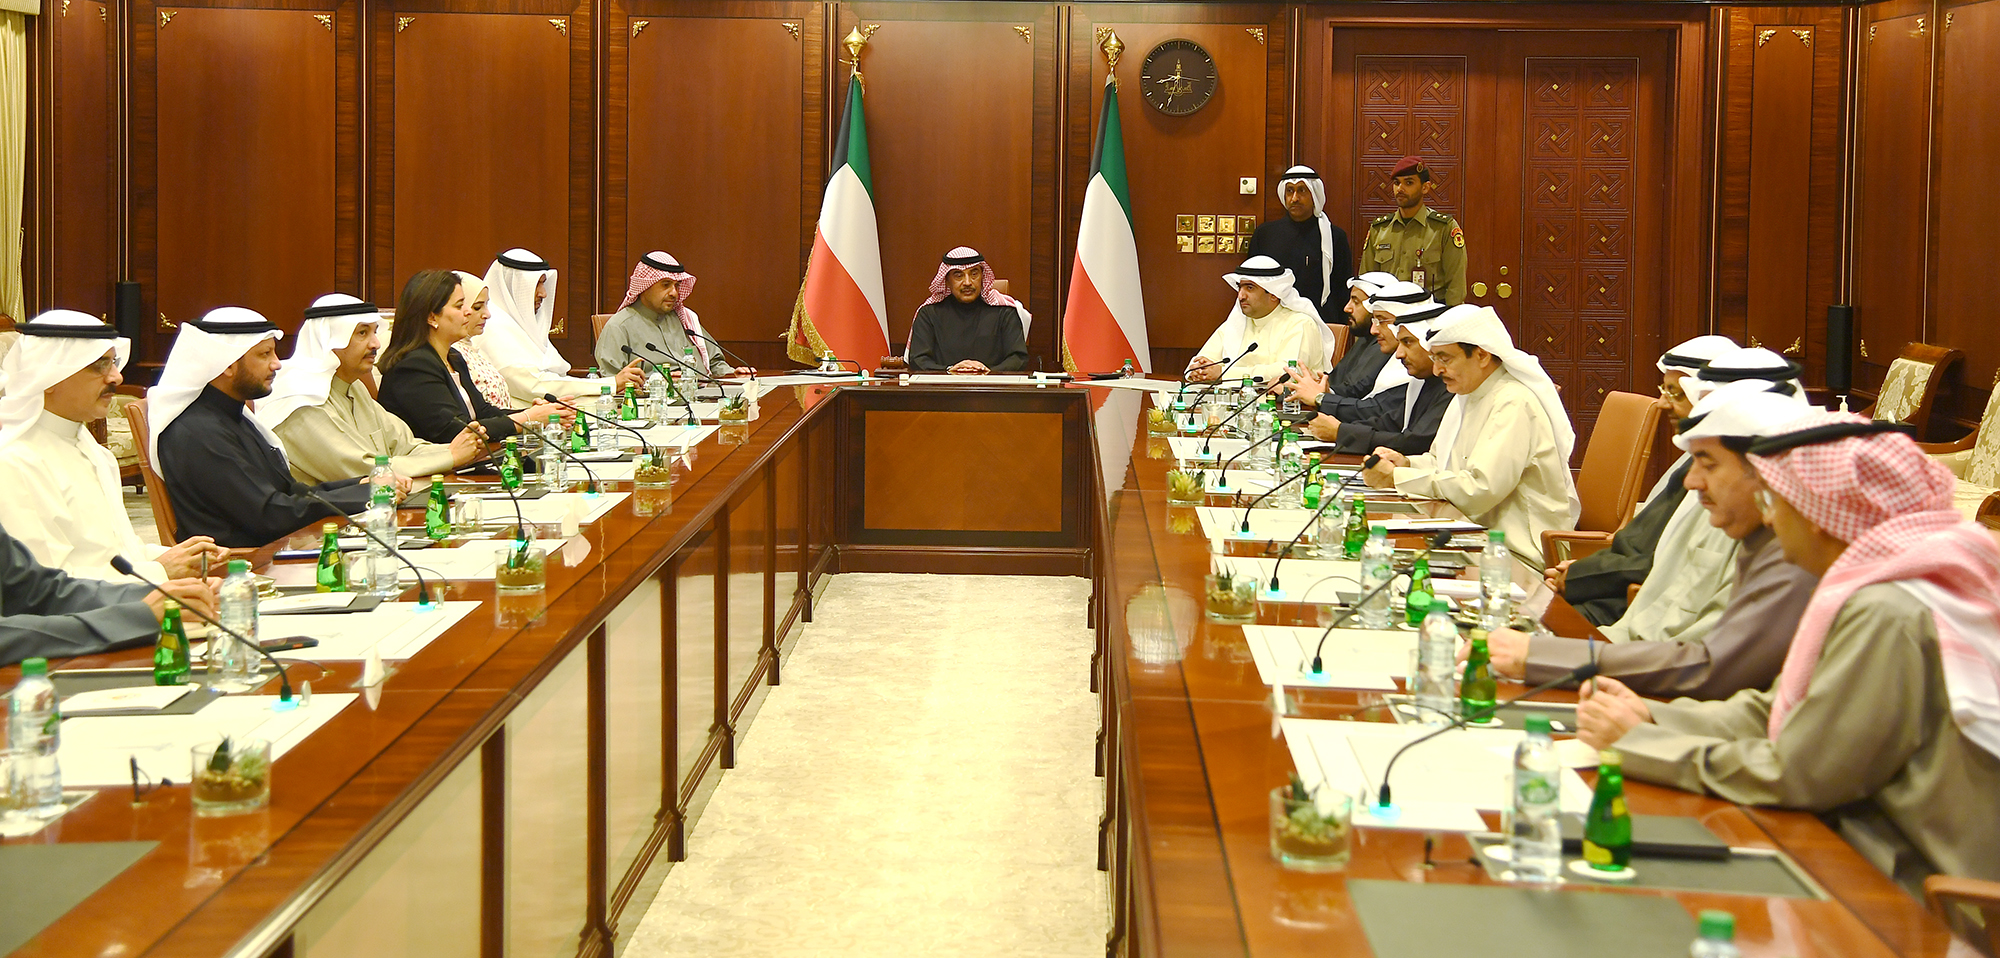 The Cabinet held its extraordinary session 